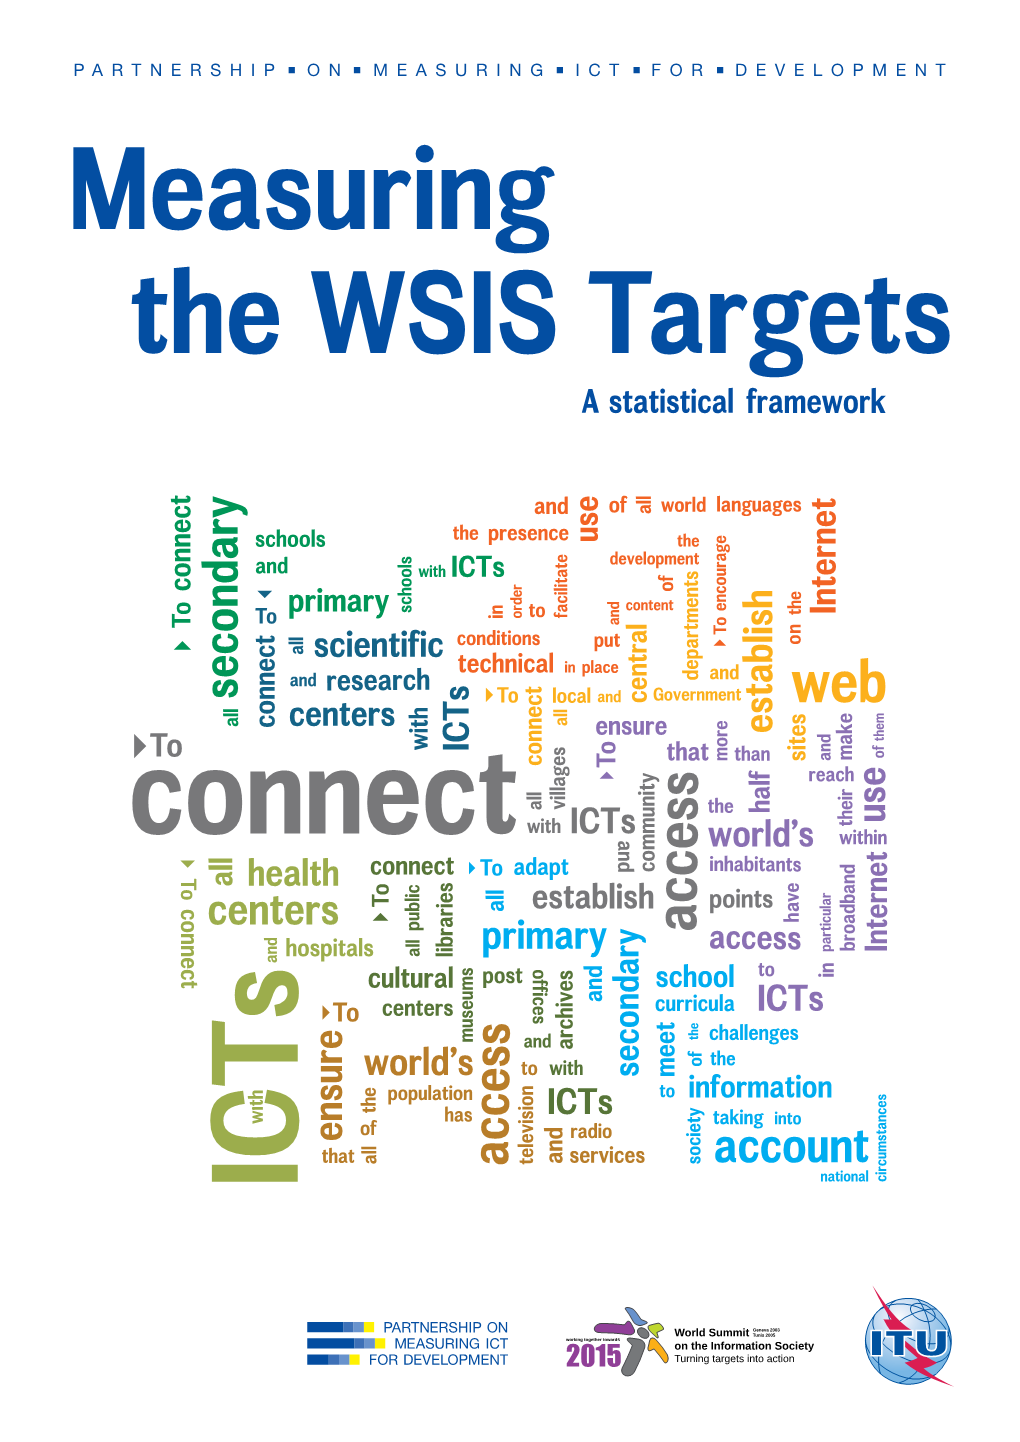 Measuring the WSIS Targets: a Statistical Framework